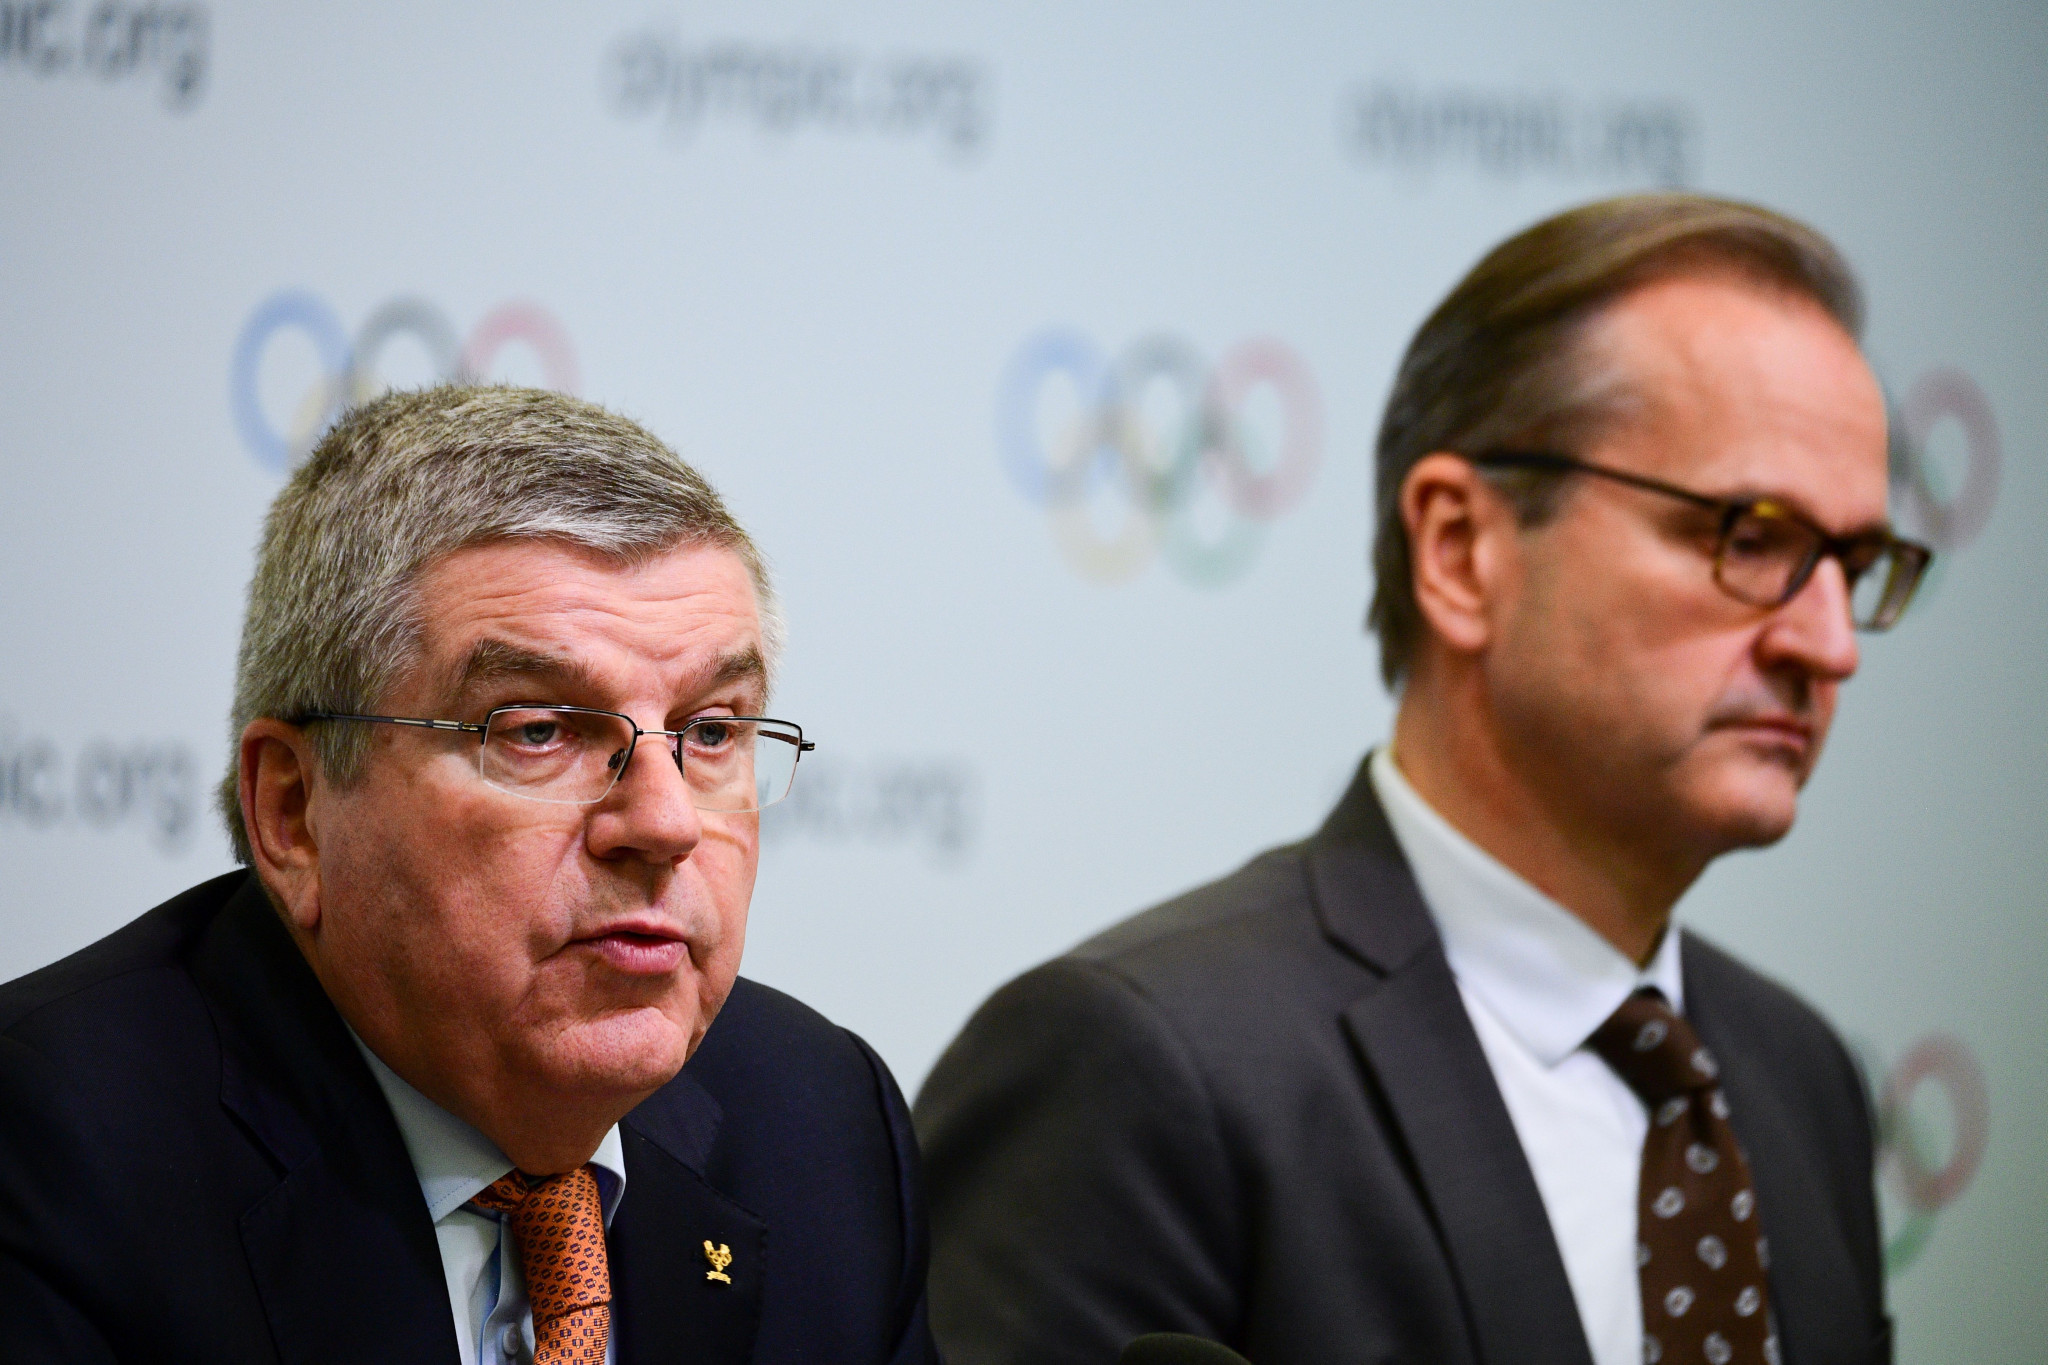 Bach reassures athletes Olympic boxing tournament will be held at Tokyo 2020 